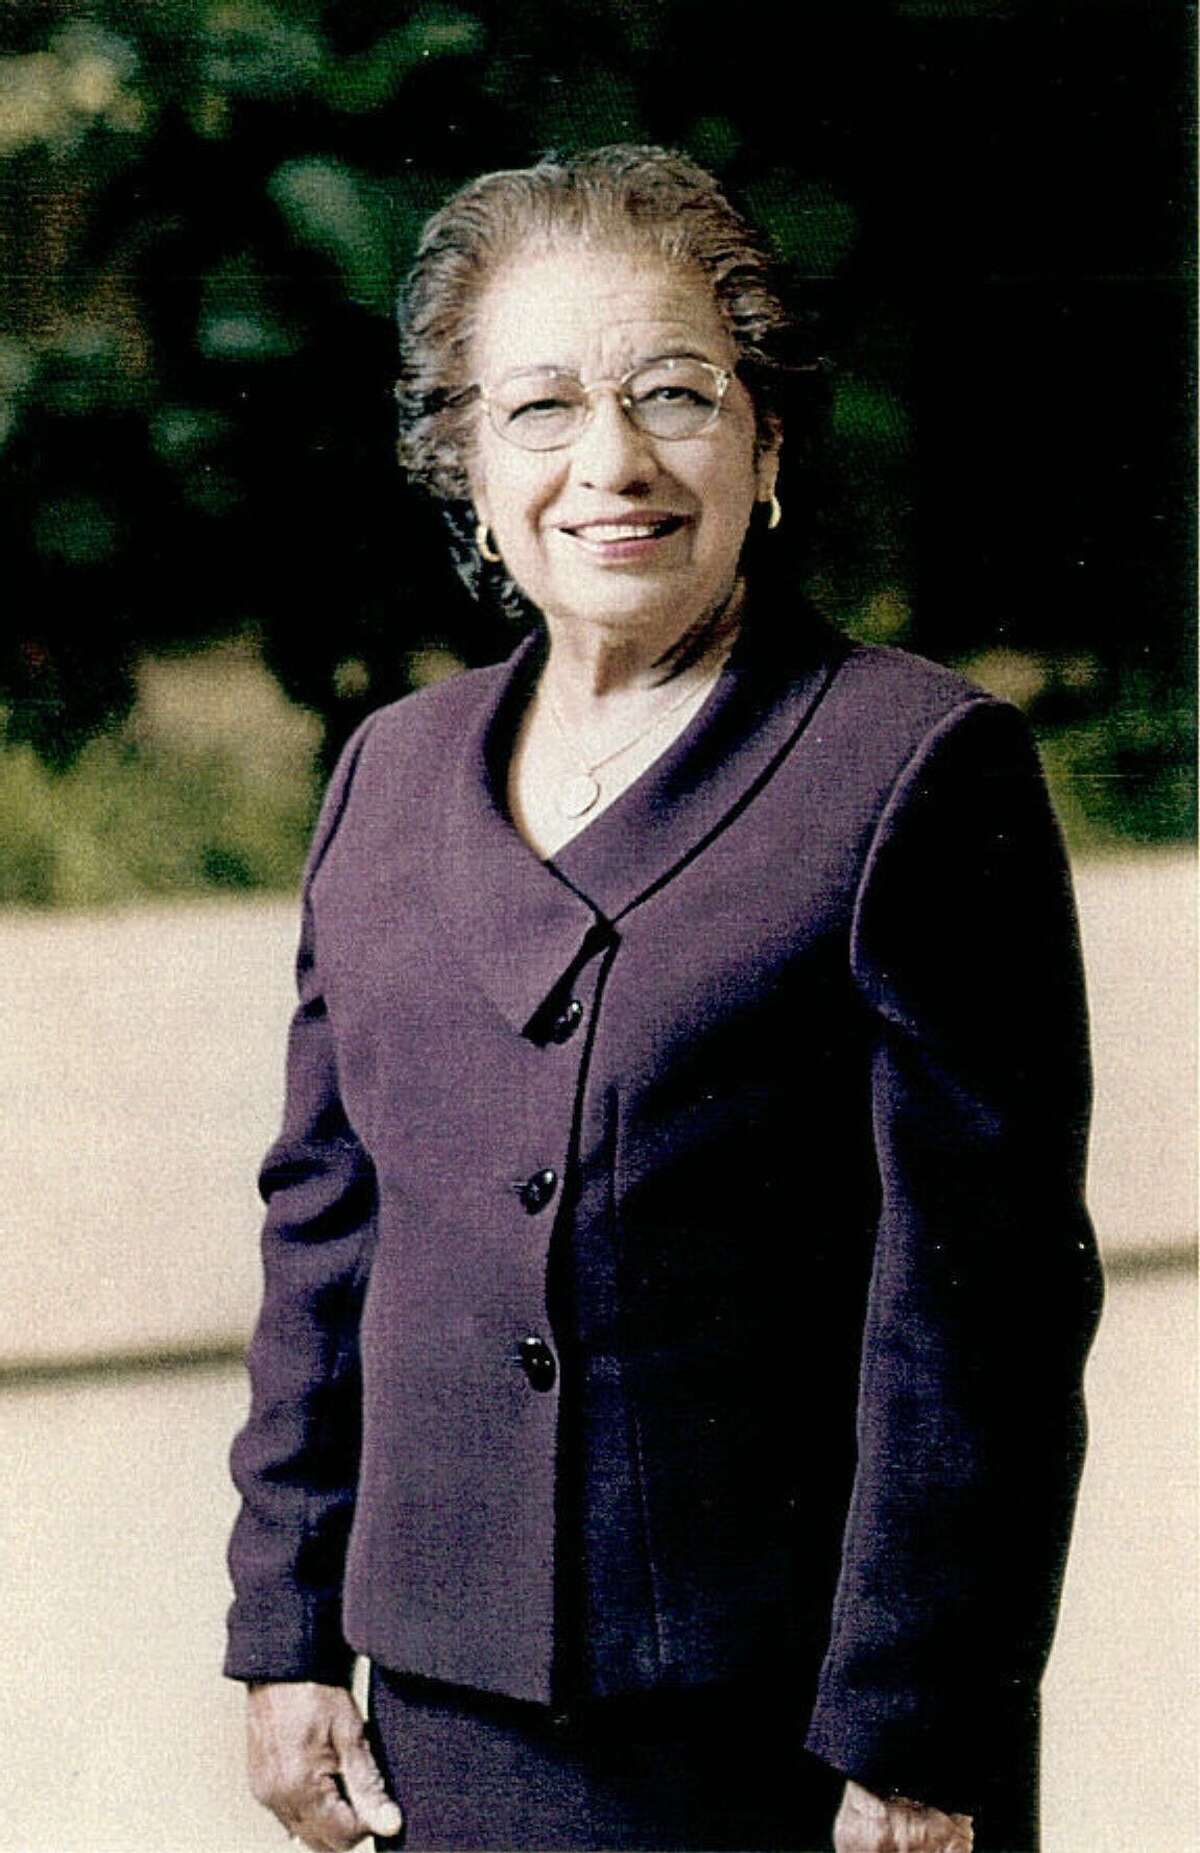 Olga Gallegos was the first Mexican American HISD board president.